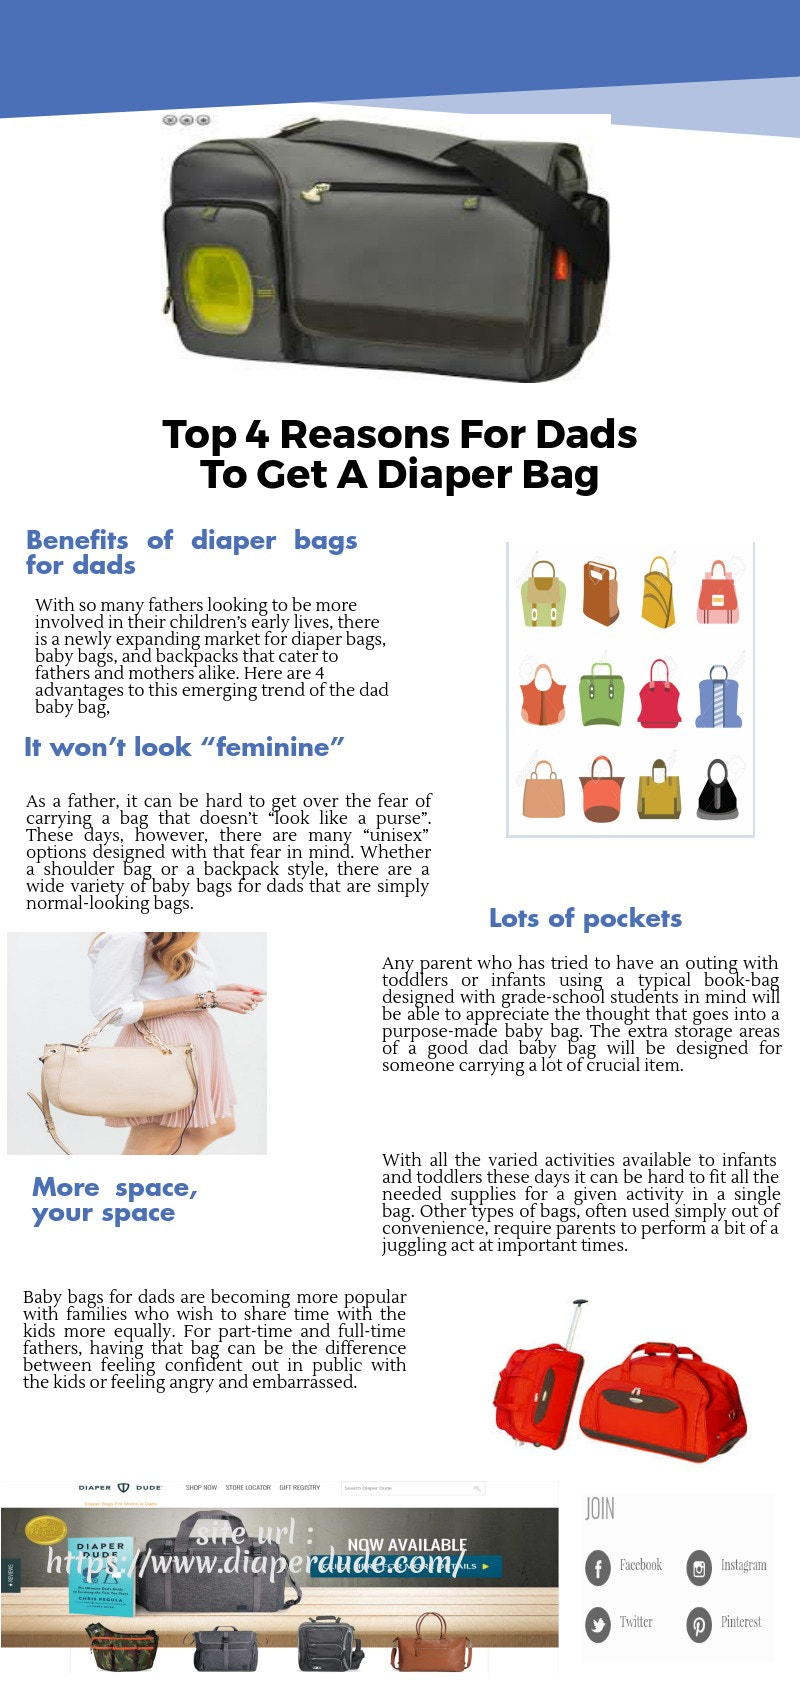 Top 4 Reasons For Dads To Get A Diaper Bag